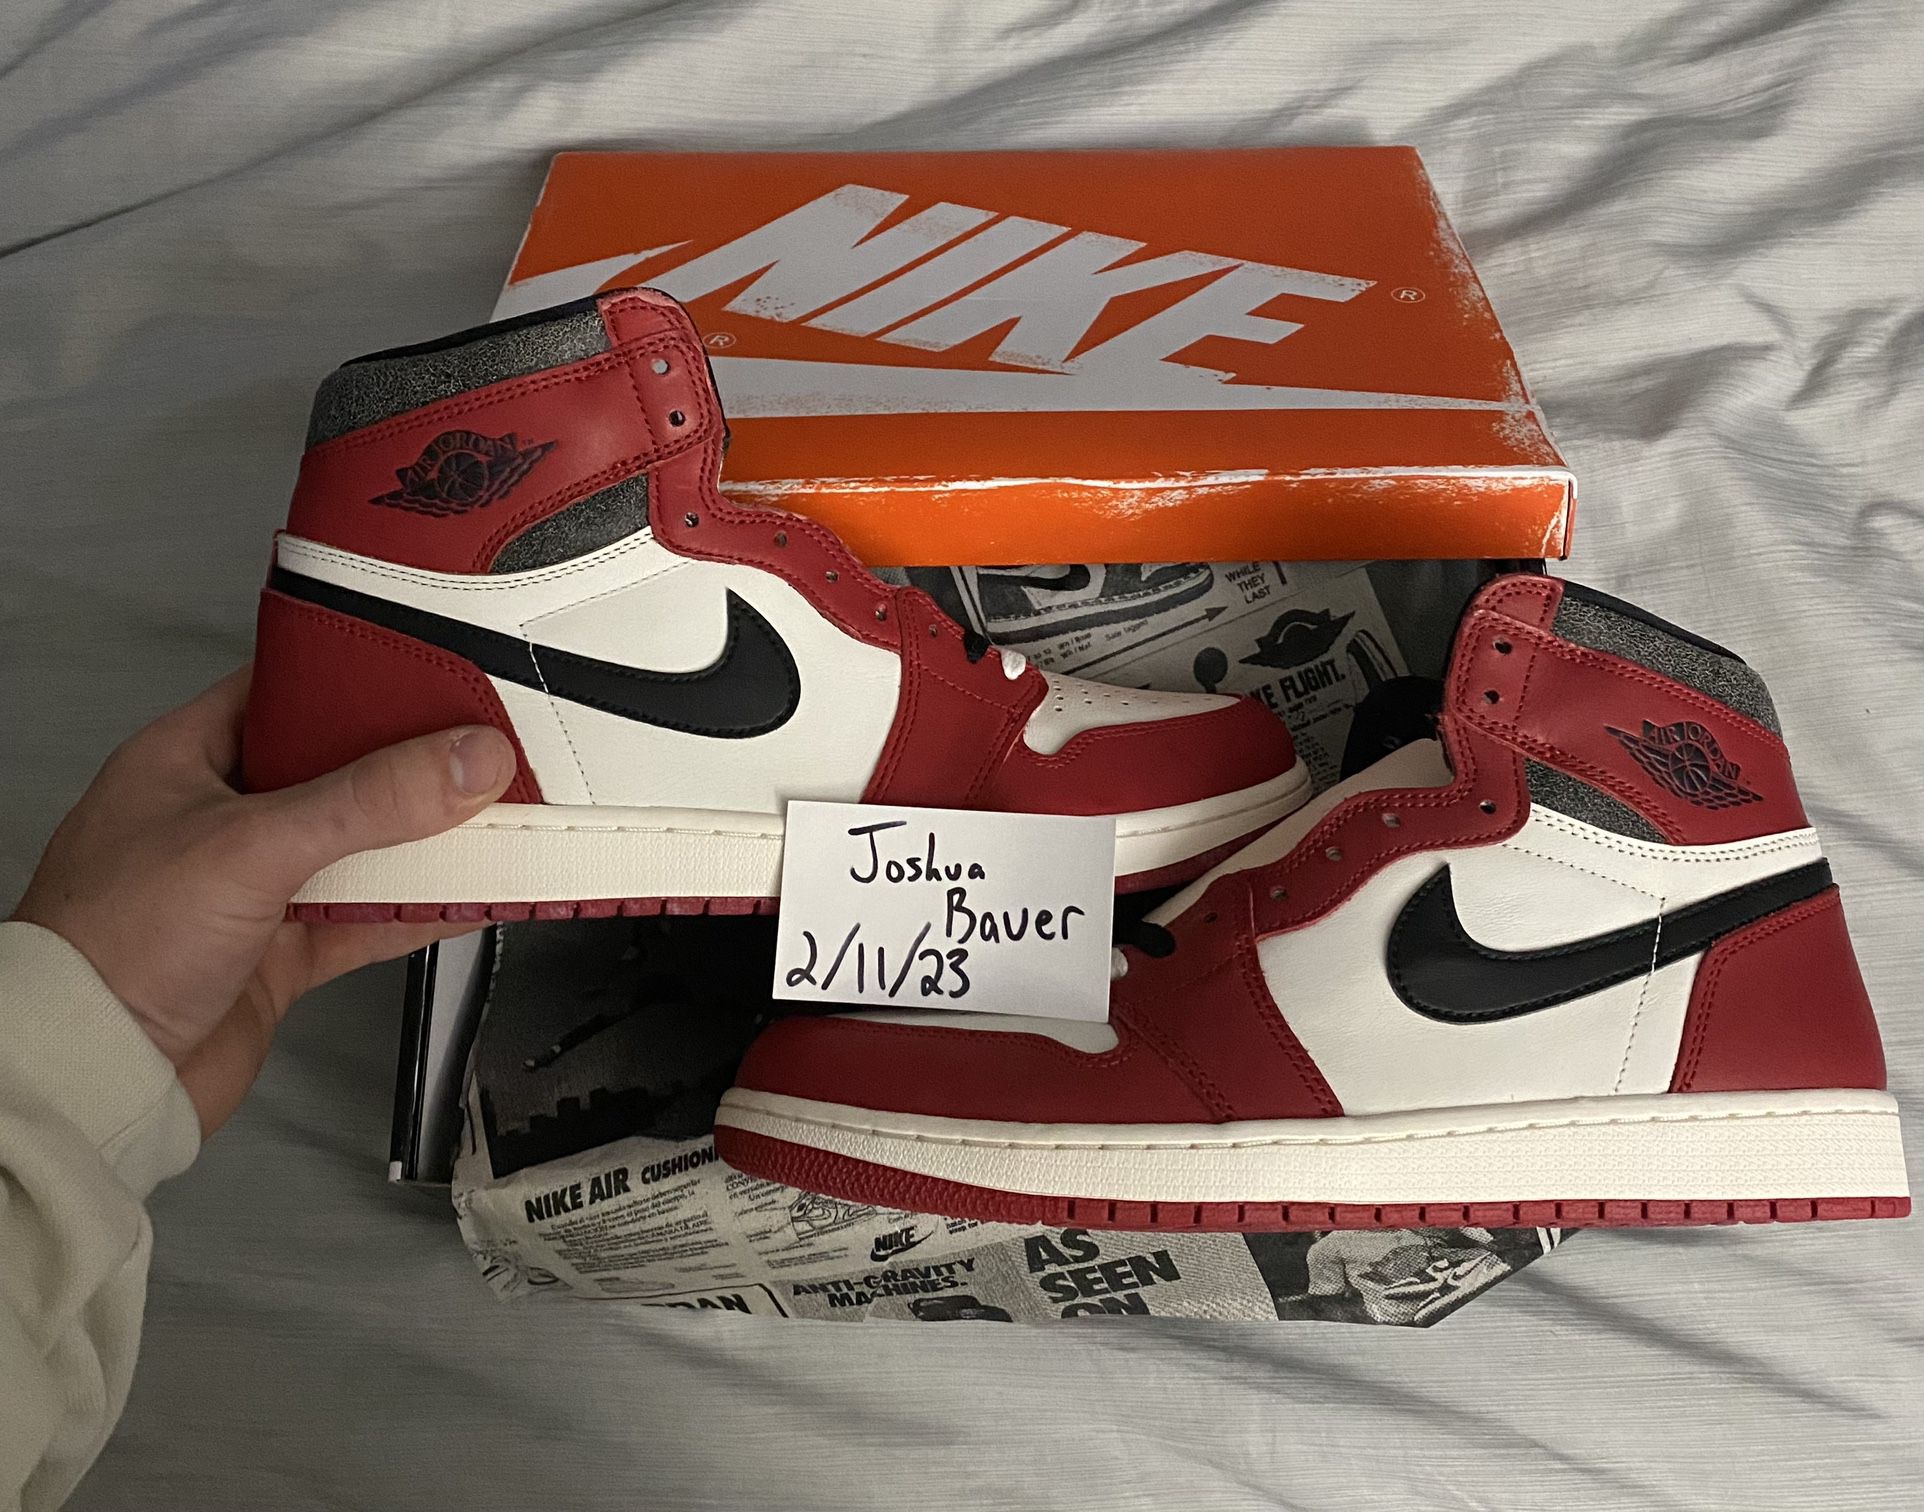 Size 12 - Jordan 1 Retro High OG Reimagined Lost and Found $550 Brand New with Everything FS/NFT